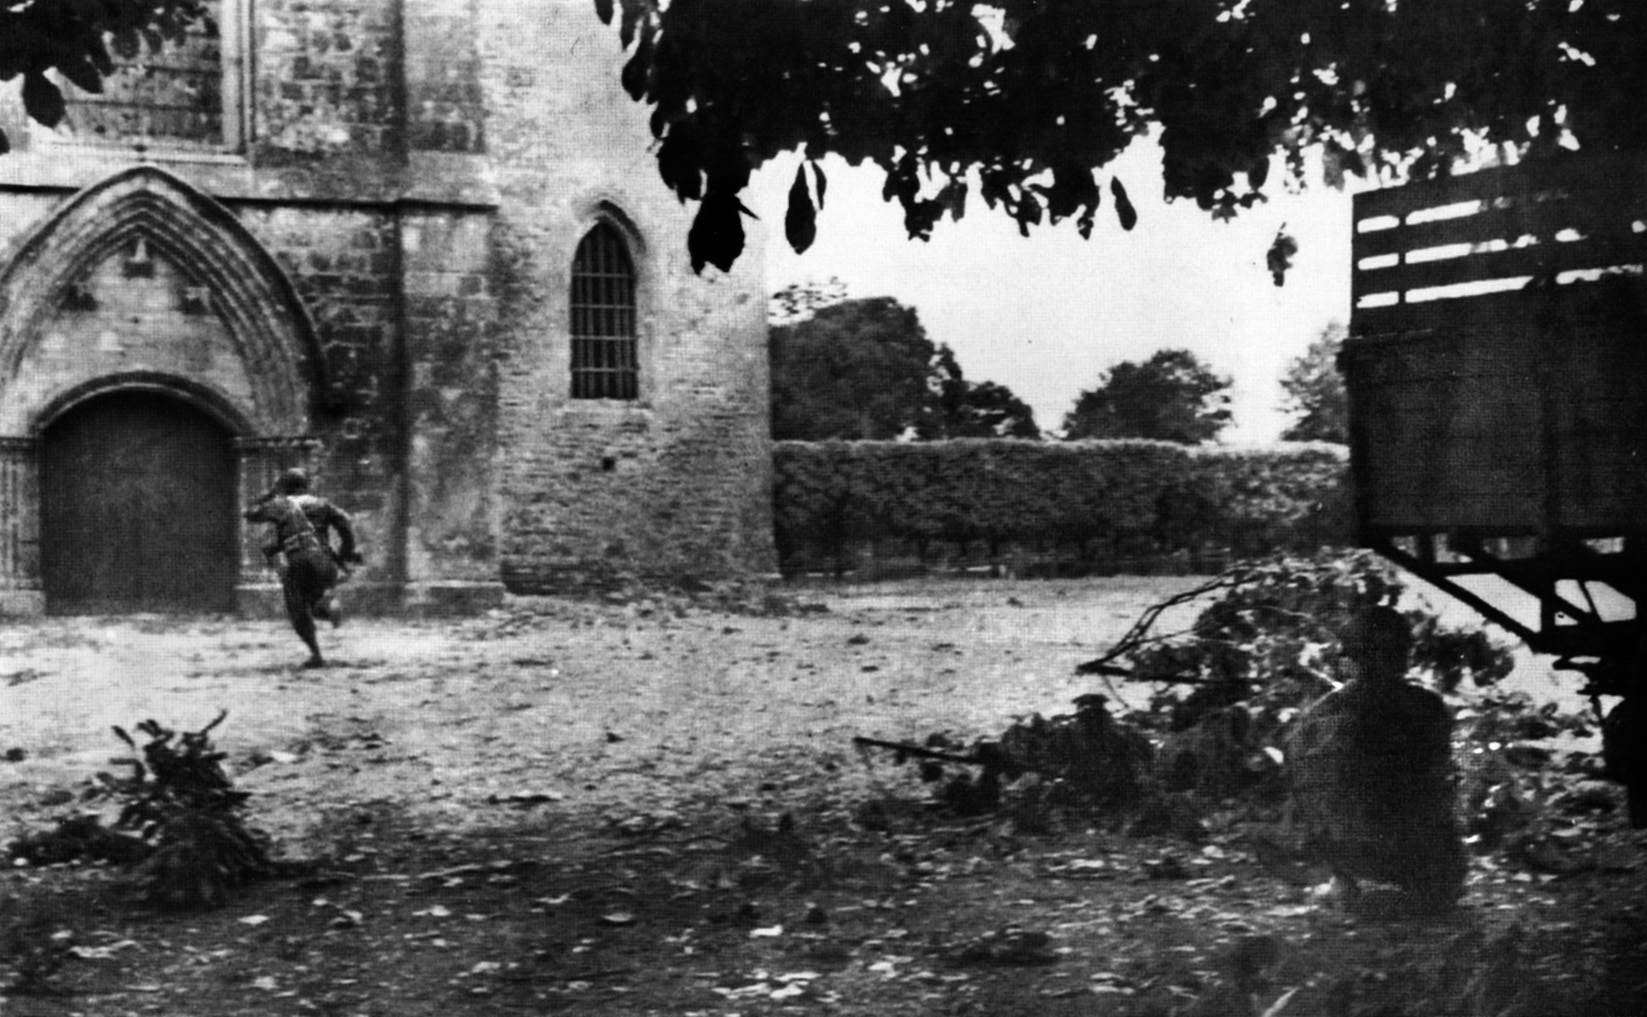 Seeking cover from incoming German artillery shells on June 6, 1944, men of the 505th Parachute Infantry Regiment, 82nd Airborne Division run for the chapel in the town of Ste-Mère-Église. 